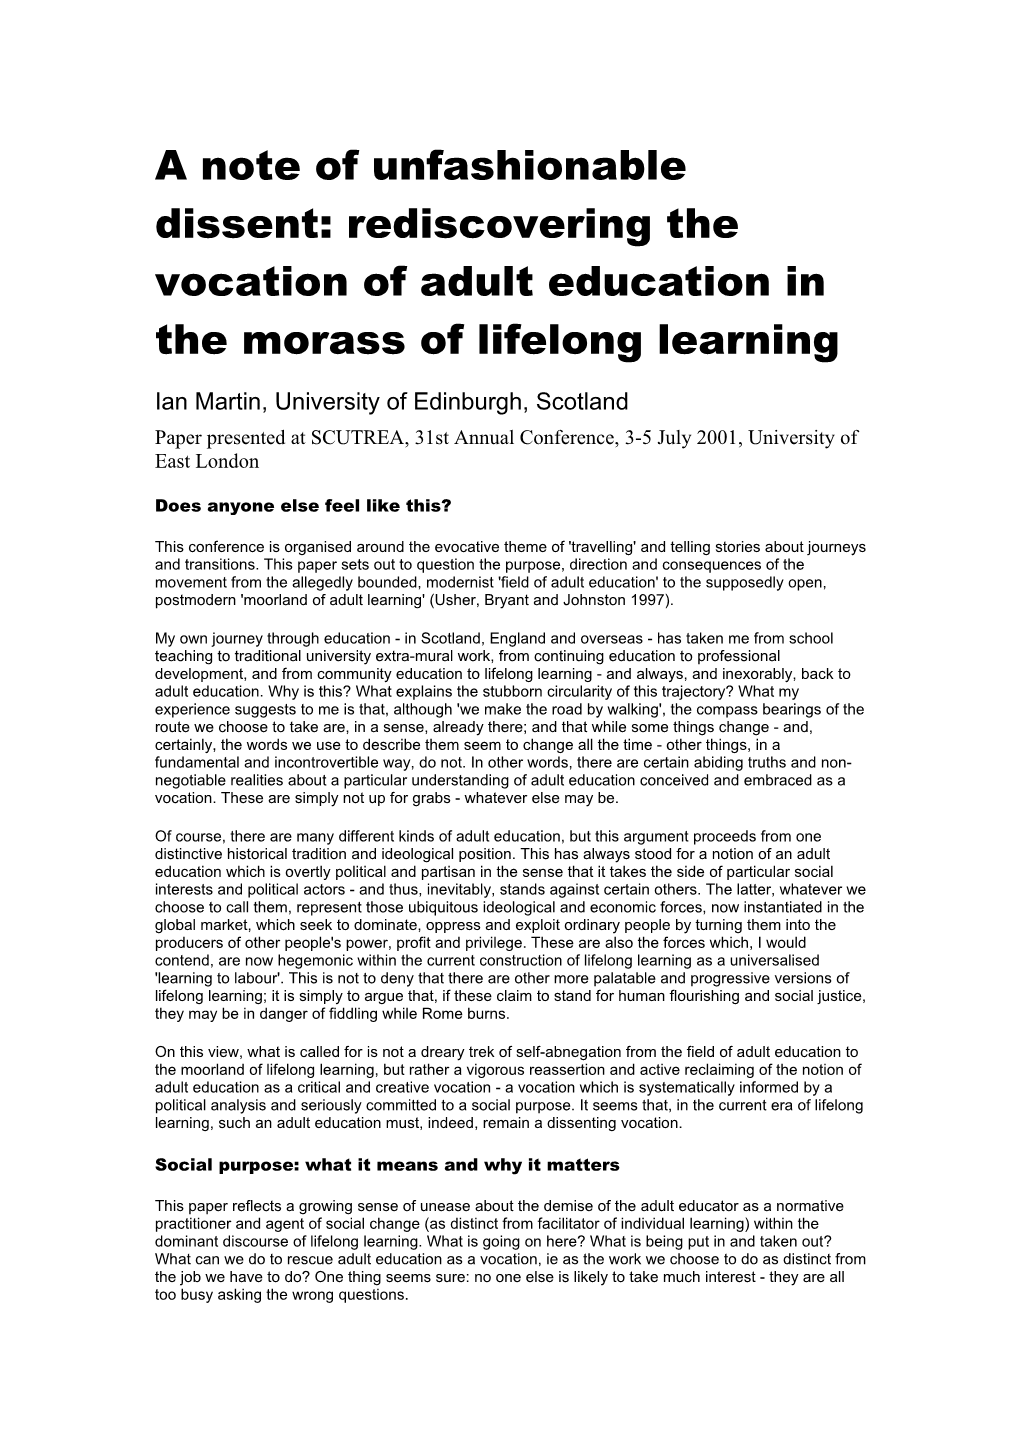 A Note of Unfashionable Dissent: Rediscovering the Vocation of Adult Education in the Morass